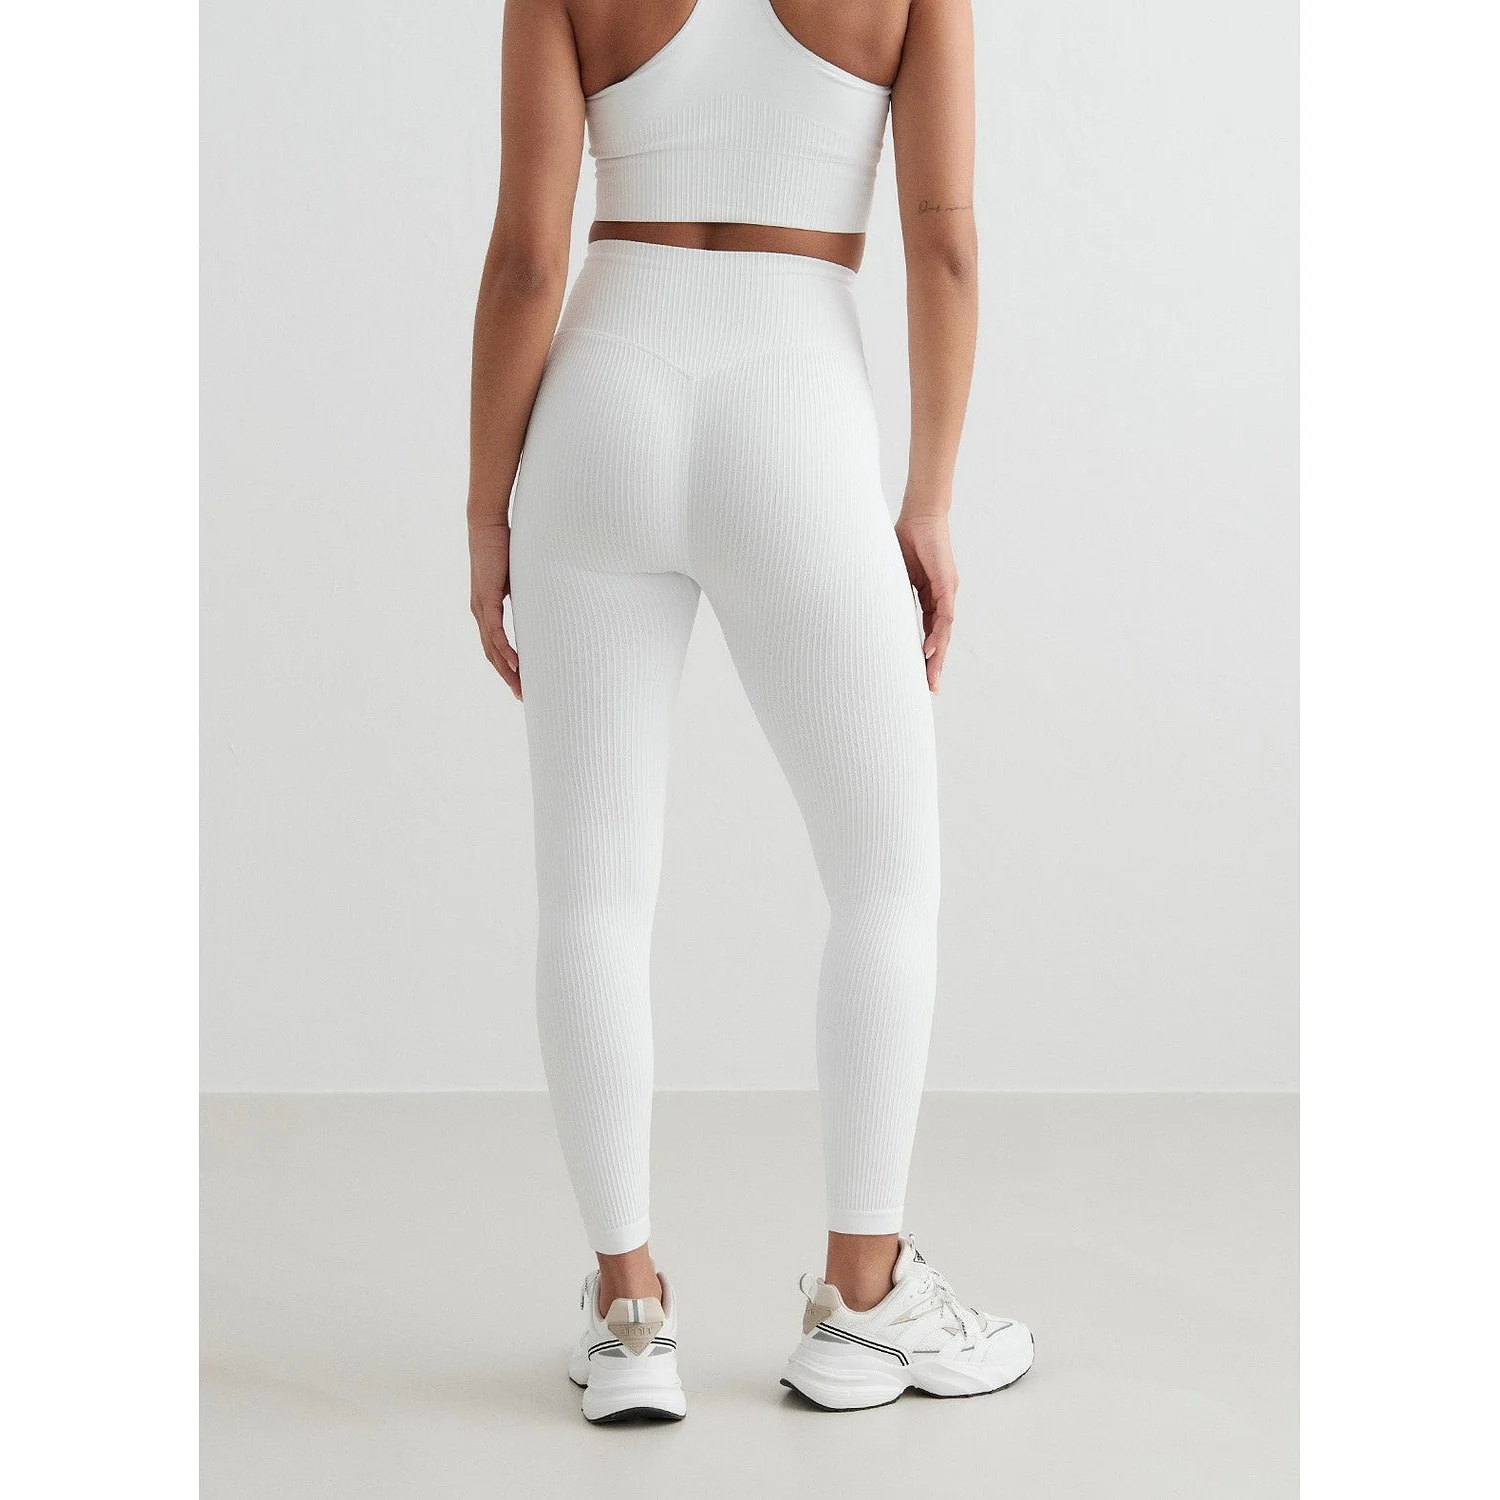 White Ribbed Seamless Tights